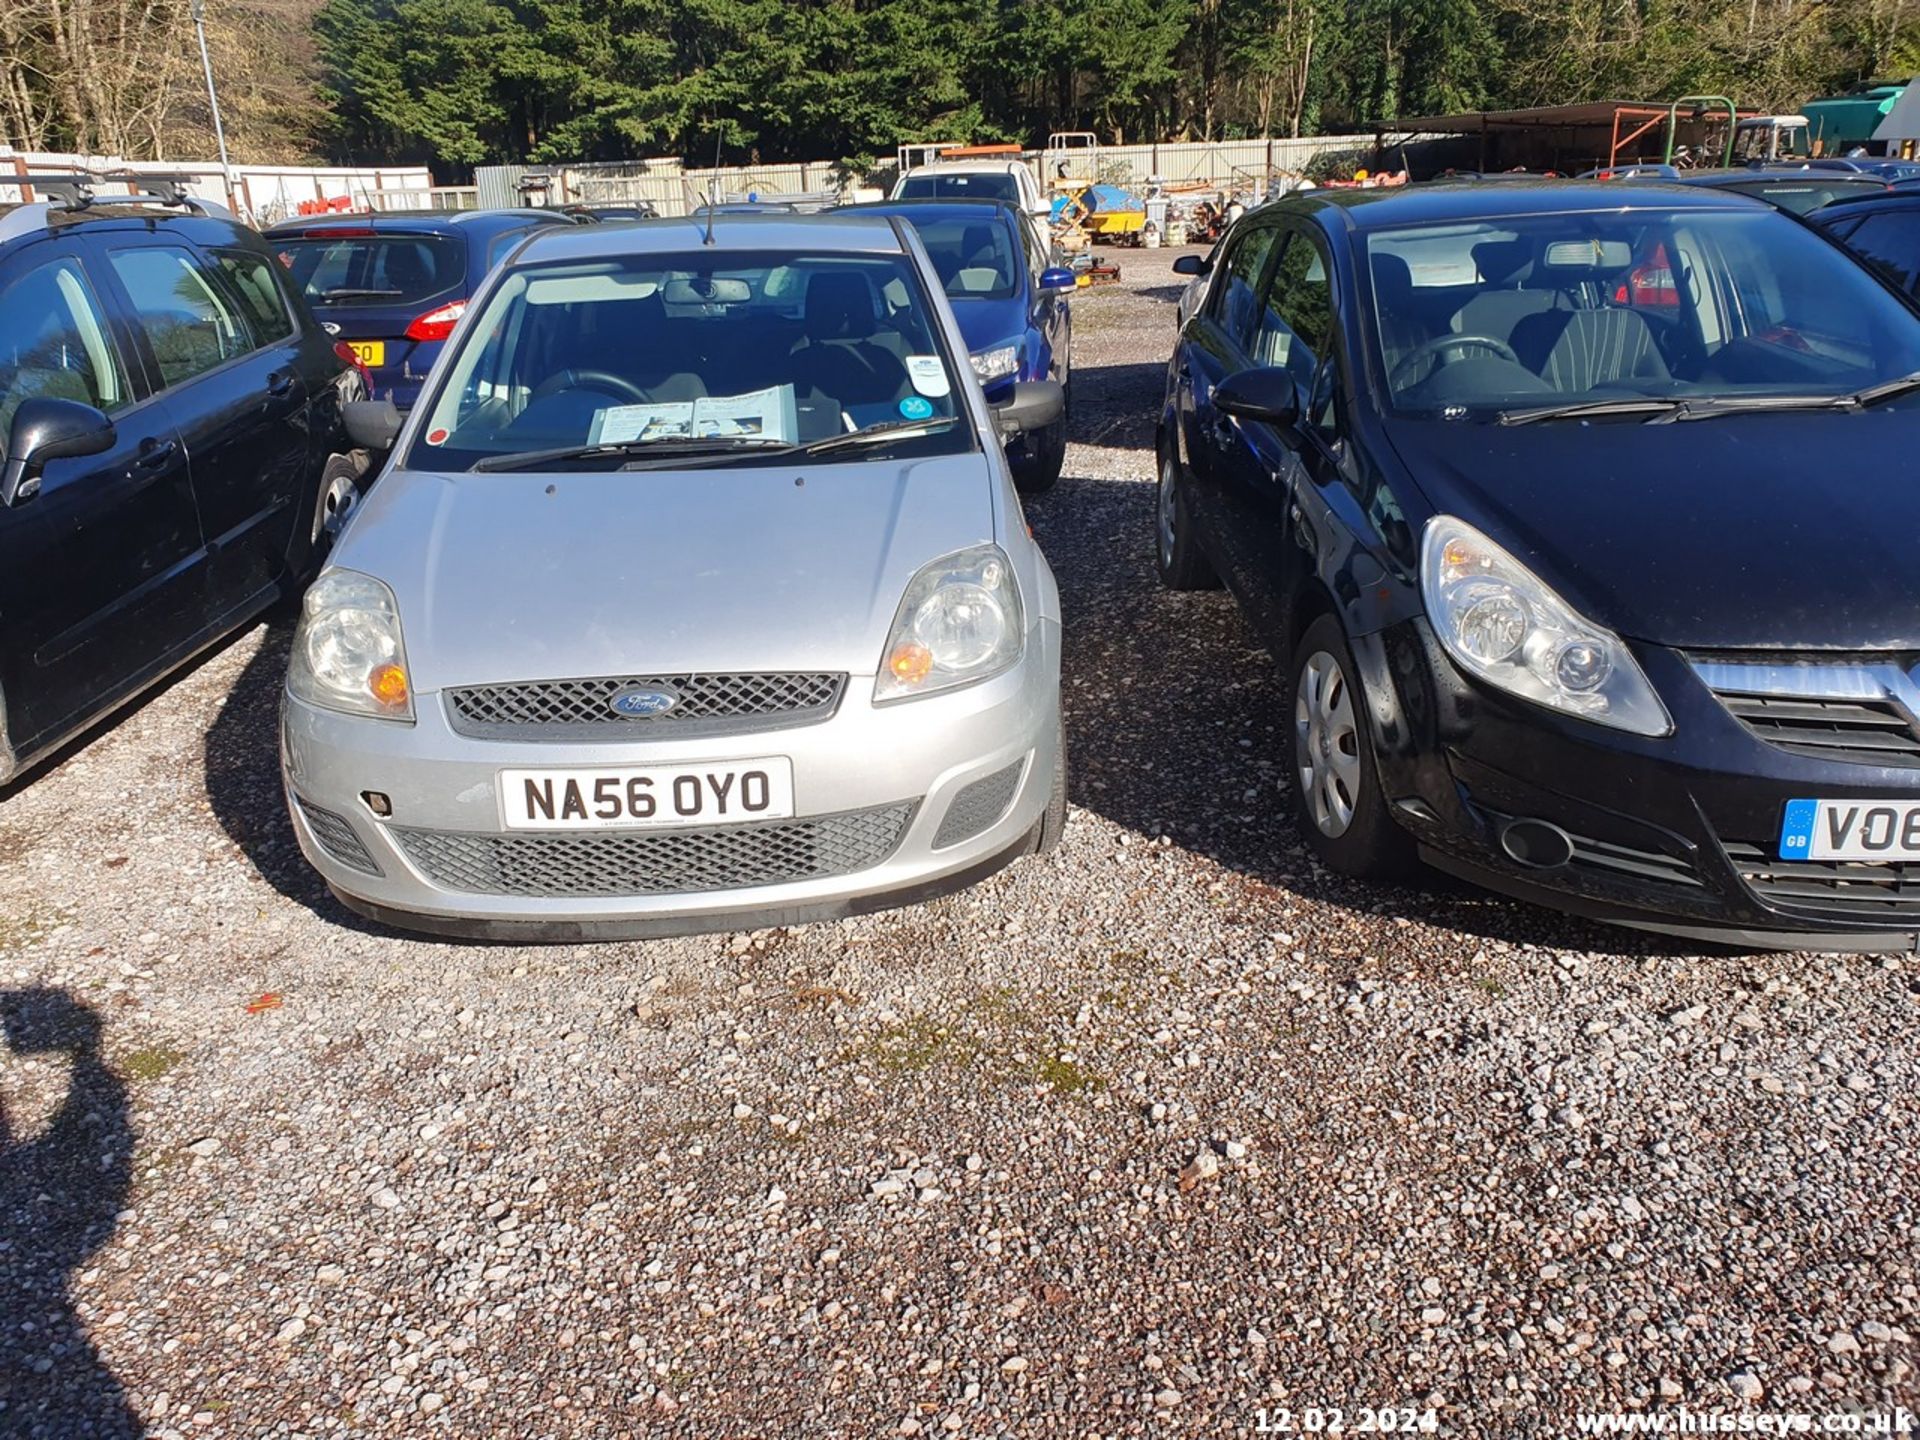 06/56 FORD FIESTA STYLE TDCI - 1399cc 5dr Hatchback (Silver) - Image 7 of 39